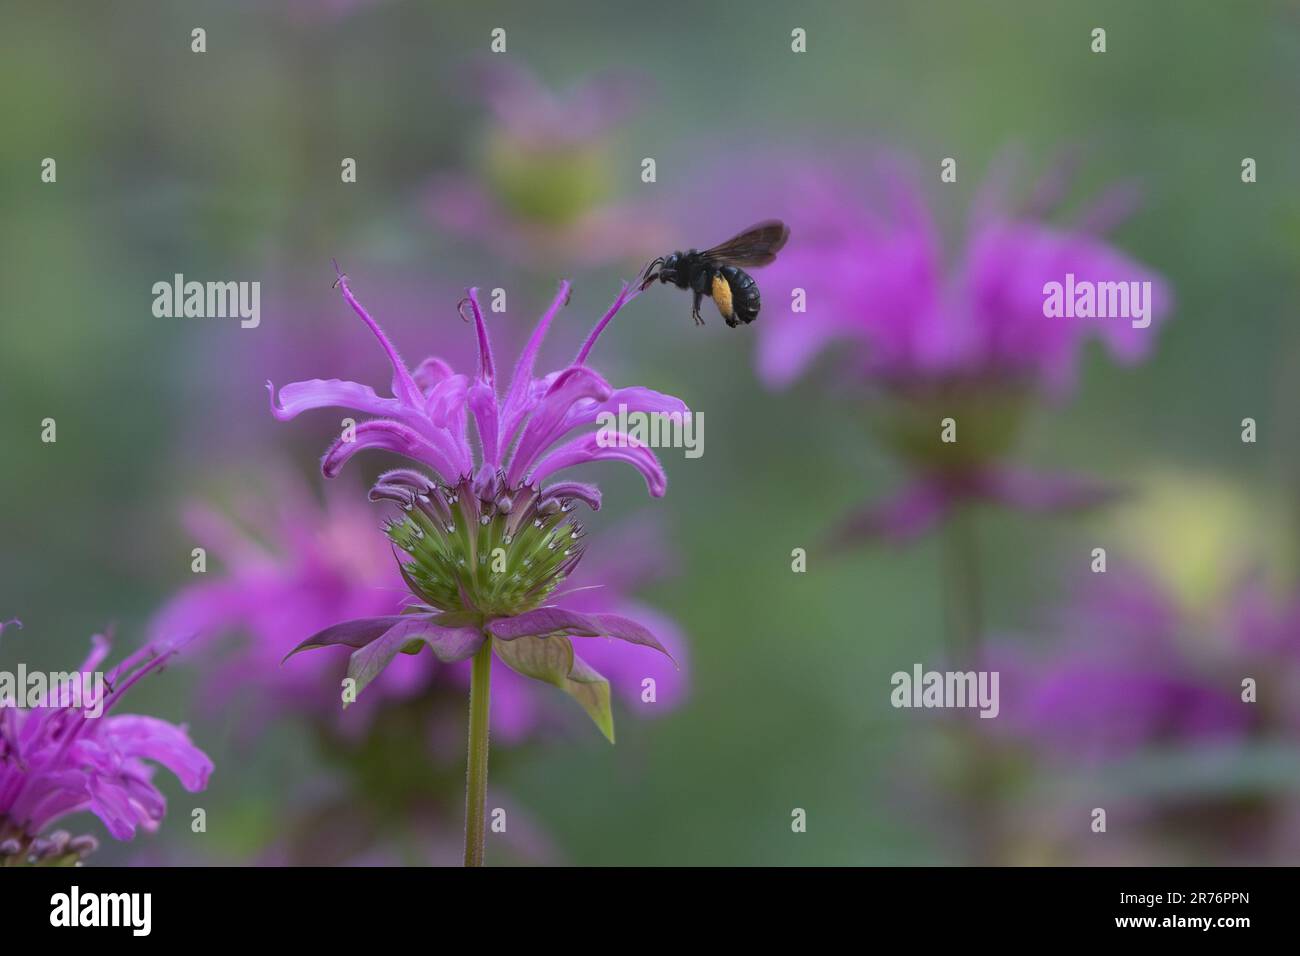 A Two Spotted Longhorn Bee, Melissodes bimaculatus, visiting the purple flower of a beebalm plant. Stock Photo